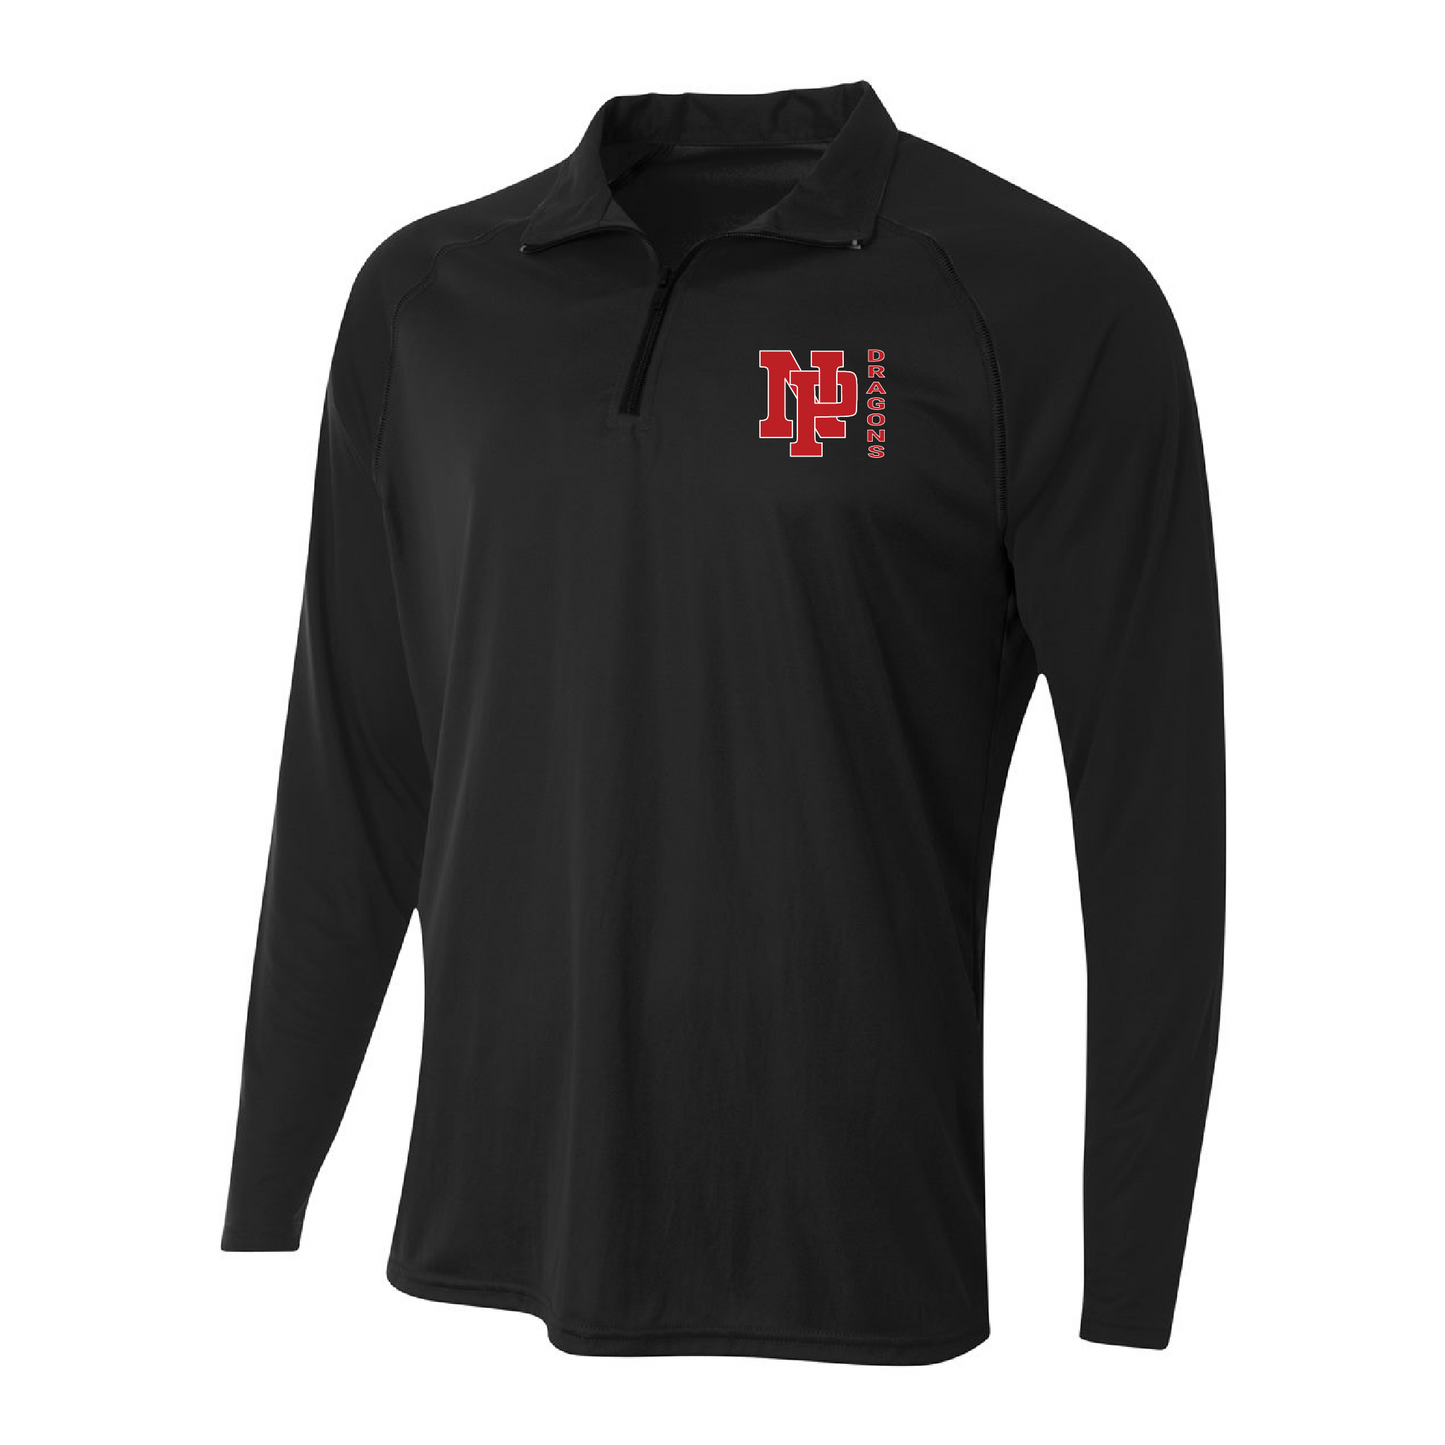 Mens Quarter Zip Pullover - Red NP DRAGONS, side by side